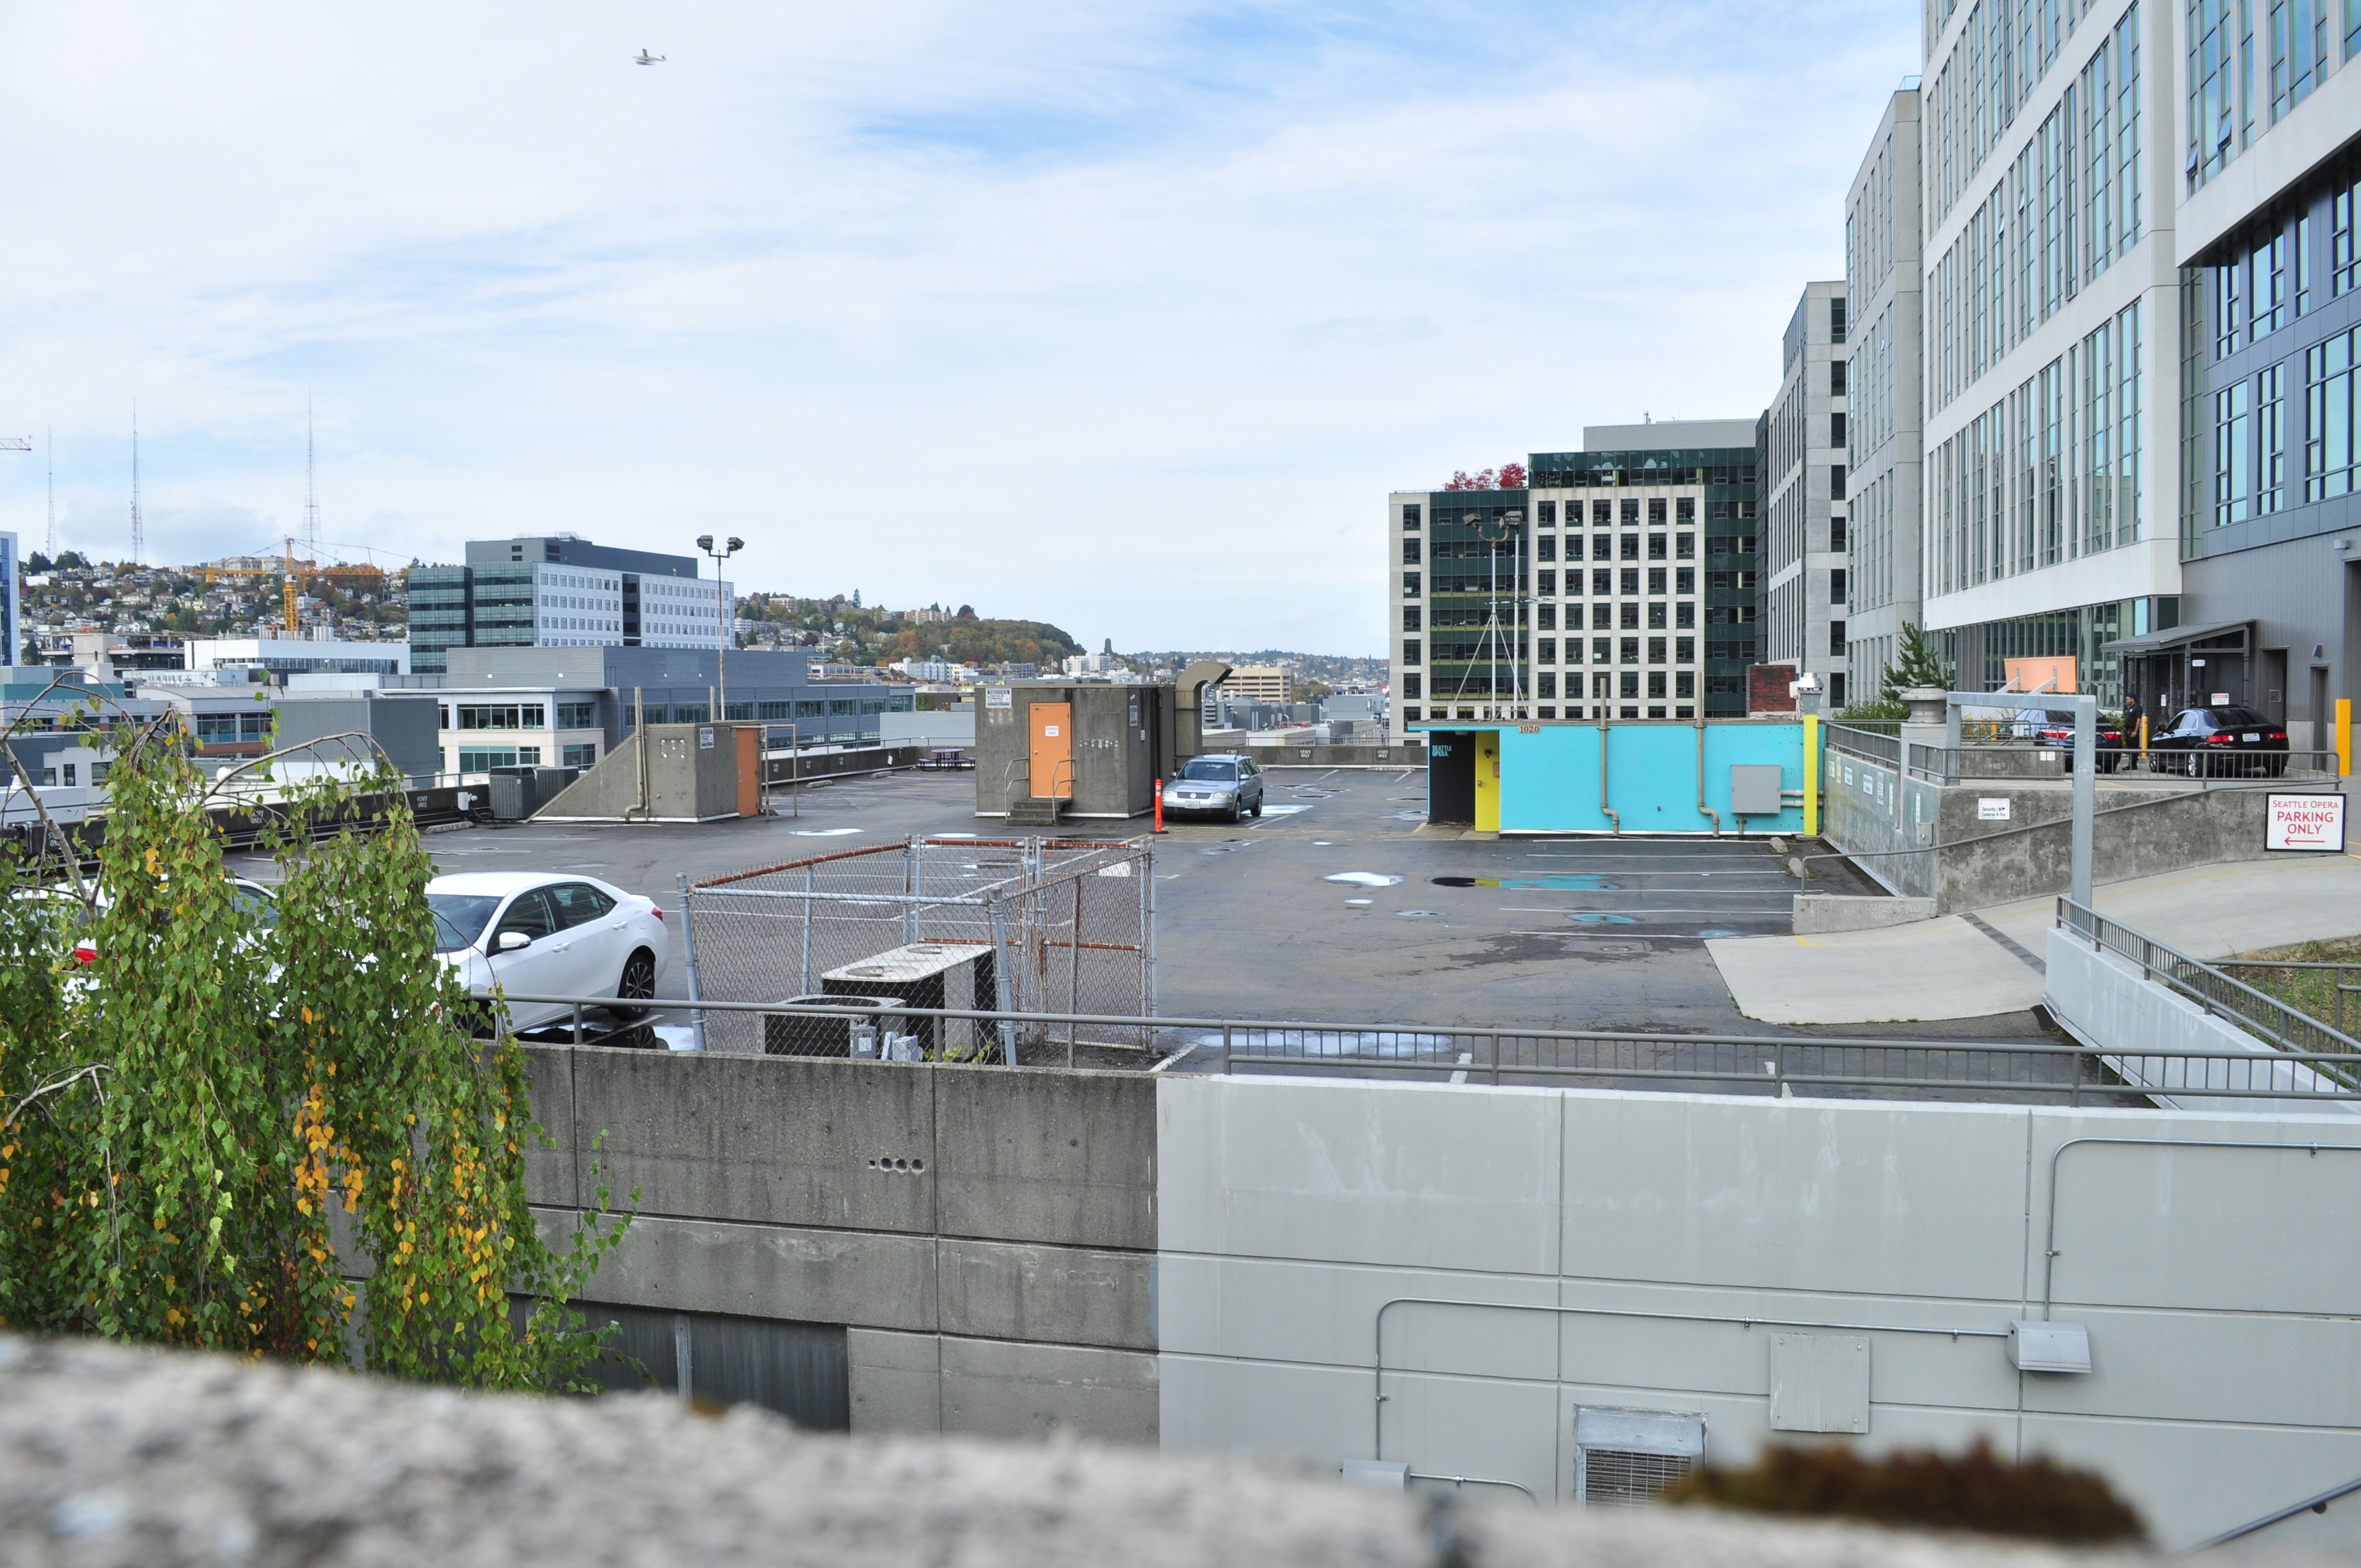 Stolpe fjerkræ Anoi File:Seattle - rooftop parking lot of the Fred Rogers Building from atop  the Brunswick Building.jpg - Wikimedia Commons